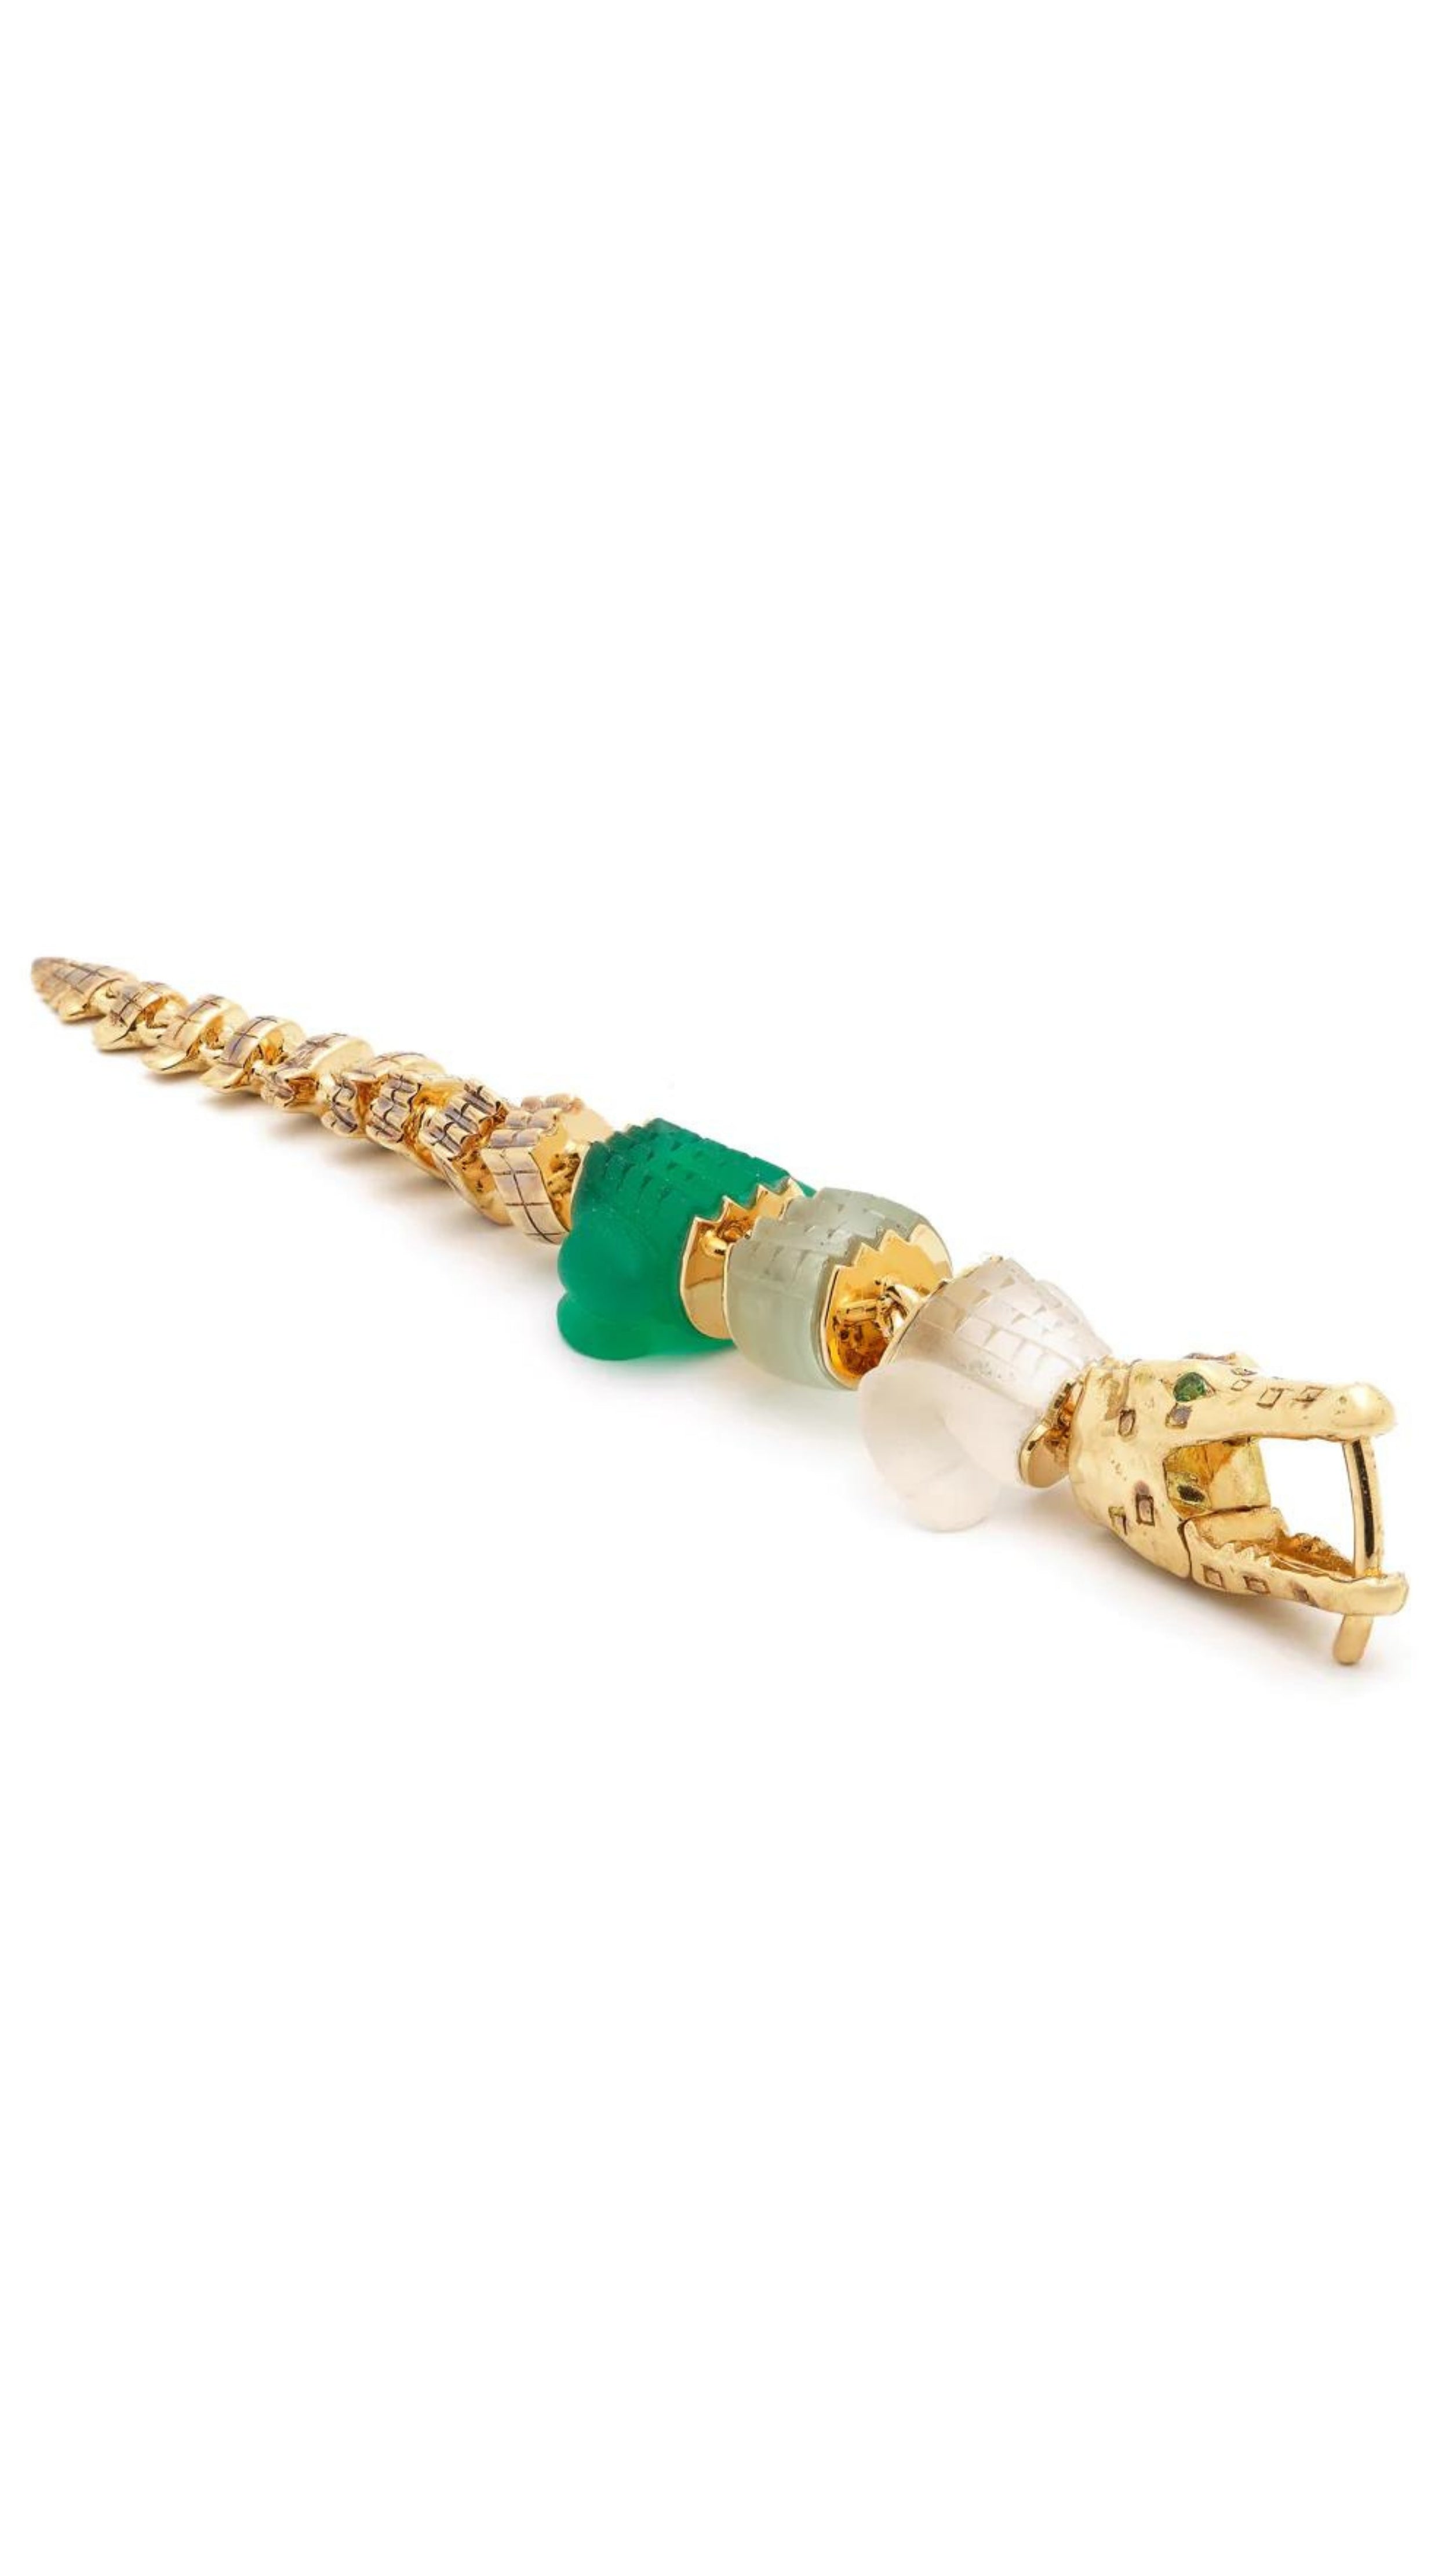 Bibi van der Velden Green Gradient Alligator Vertebrae Bite Earring. Crafted in 18K yellow gold, the alligator&#39;s body is formed by White Quartz, Green Amethyst, Green Agate while the head and tail are in solid 18K gold.  Photo shows earring laying down.